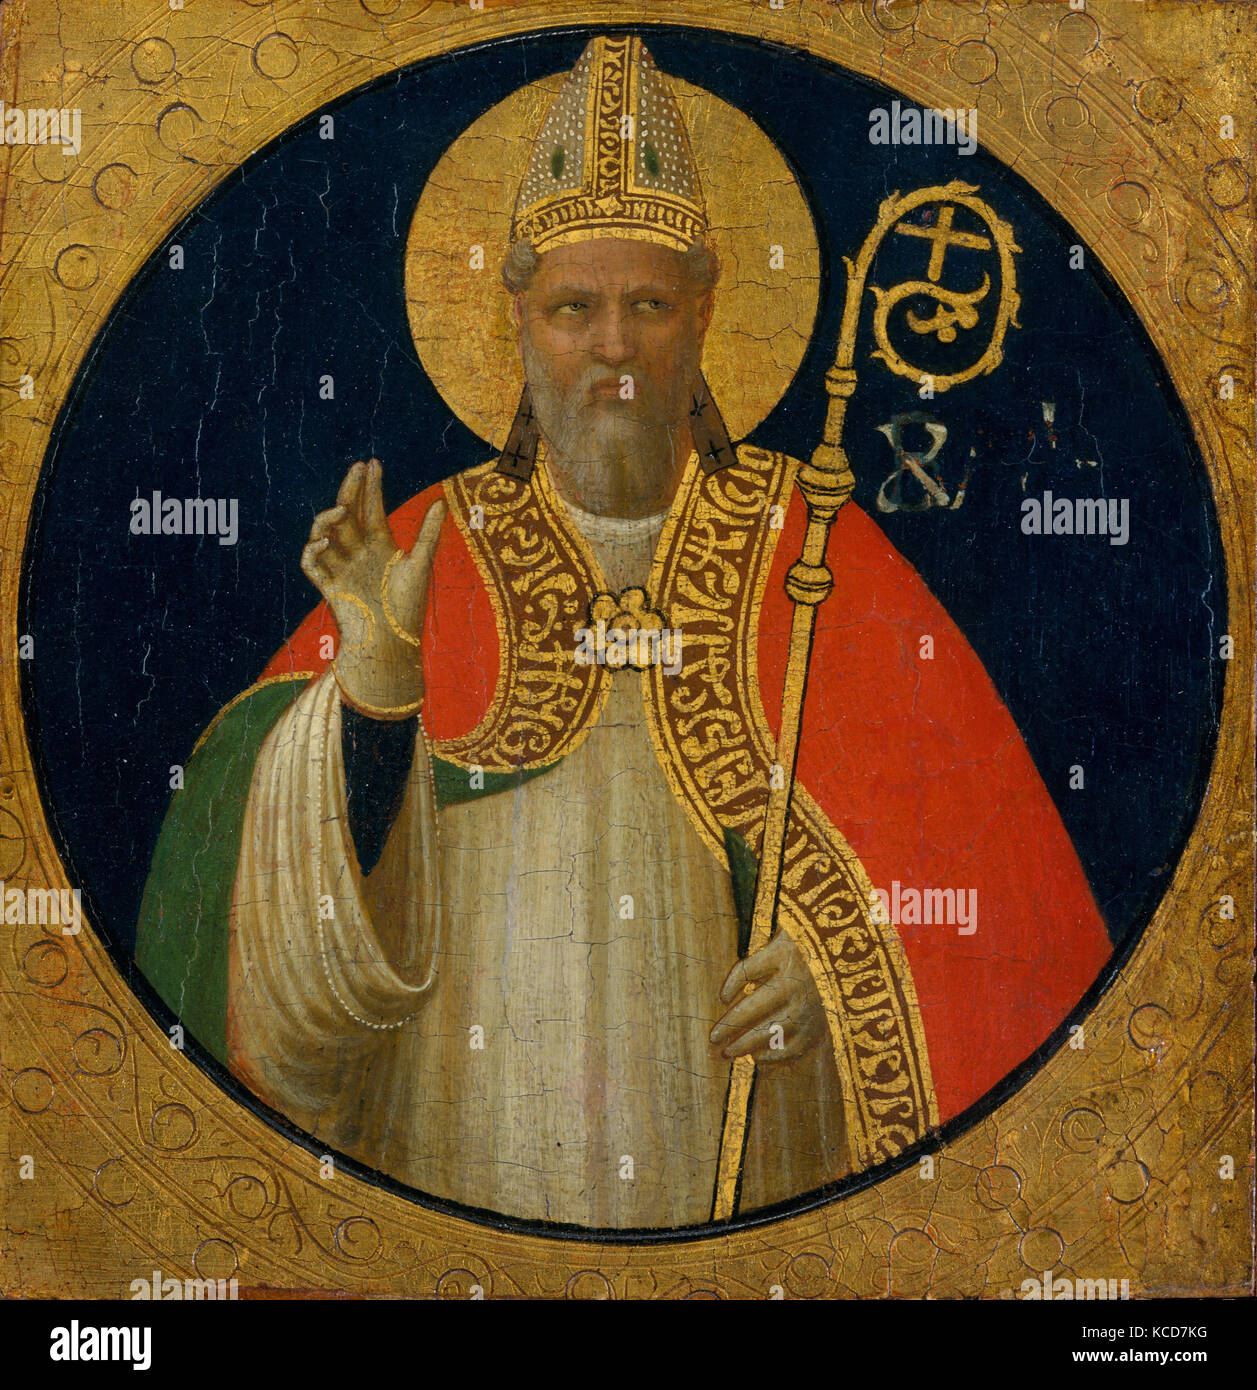 A Bishop Saint, ca. 1425, Tempera on wood, gold ground, Overall 6 1/4 x 6 1/8 in. (15.9 x 15.6 cm); diameter of roundel 5 7/8 Stock Photo